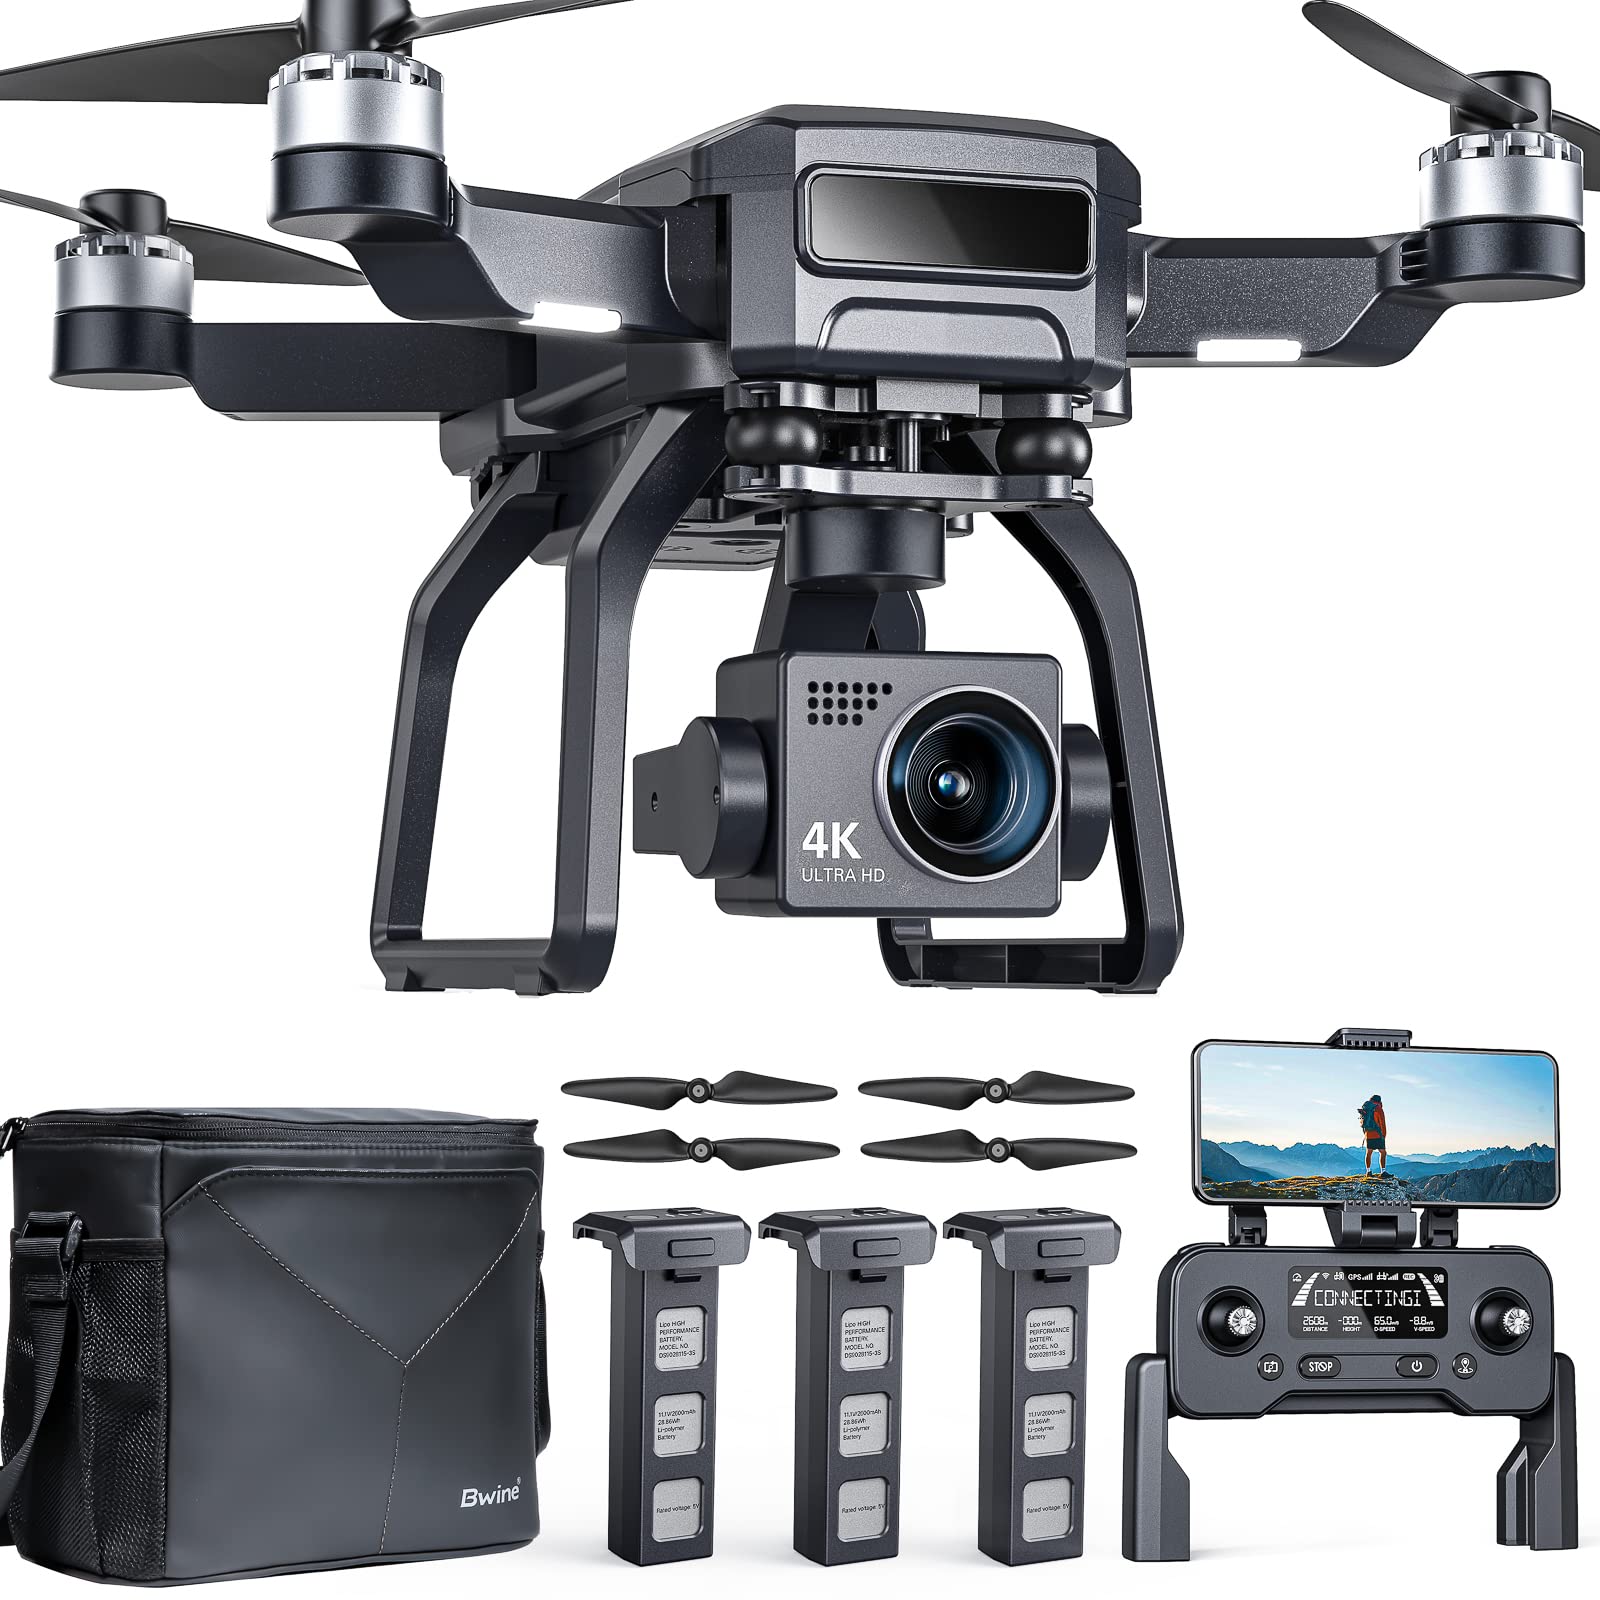  Bwine F7 GPS Camera Professional Drone with FAA Certification Completed for Adults 4K Night Vision, 3-Axis Gimbal, 2 Miles Long Range, 75 Mins Flight Time, with 3 Battery, Auto Return+Follow Me+Fly...